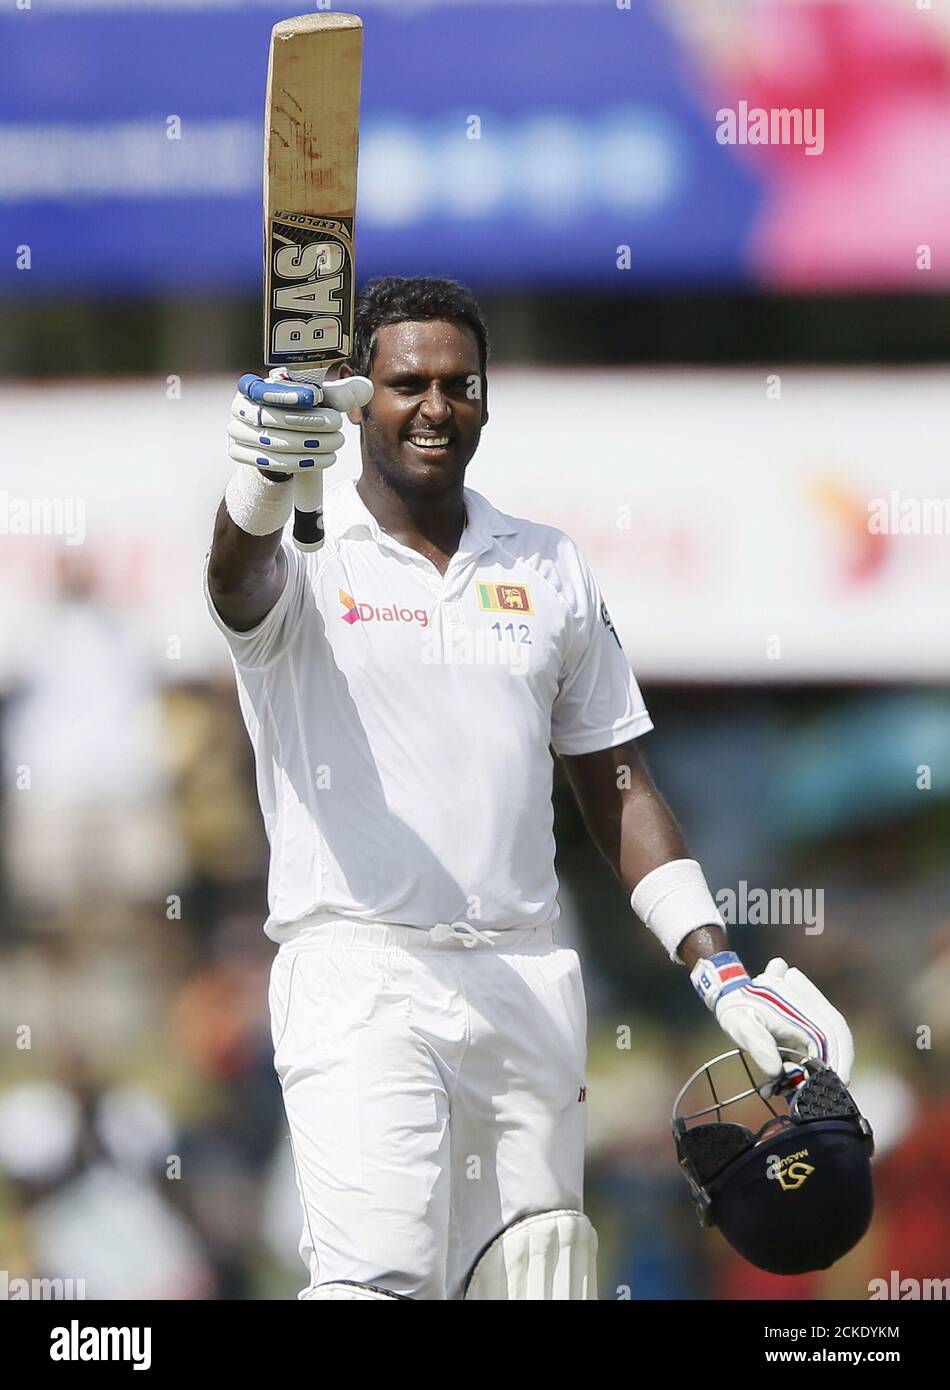 Sri Lanka's captain Angelo Mathews celebrates his century during the third day of their second test cricket match against India in Colombo August 22, 2015. REUTERS/Dinuka Liyanawatte Stock Photo